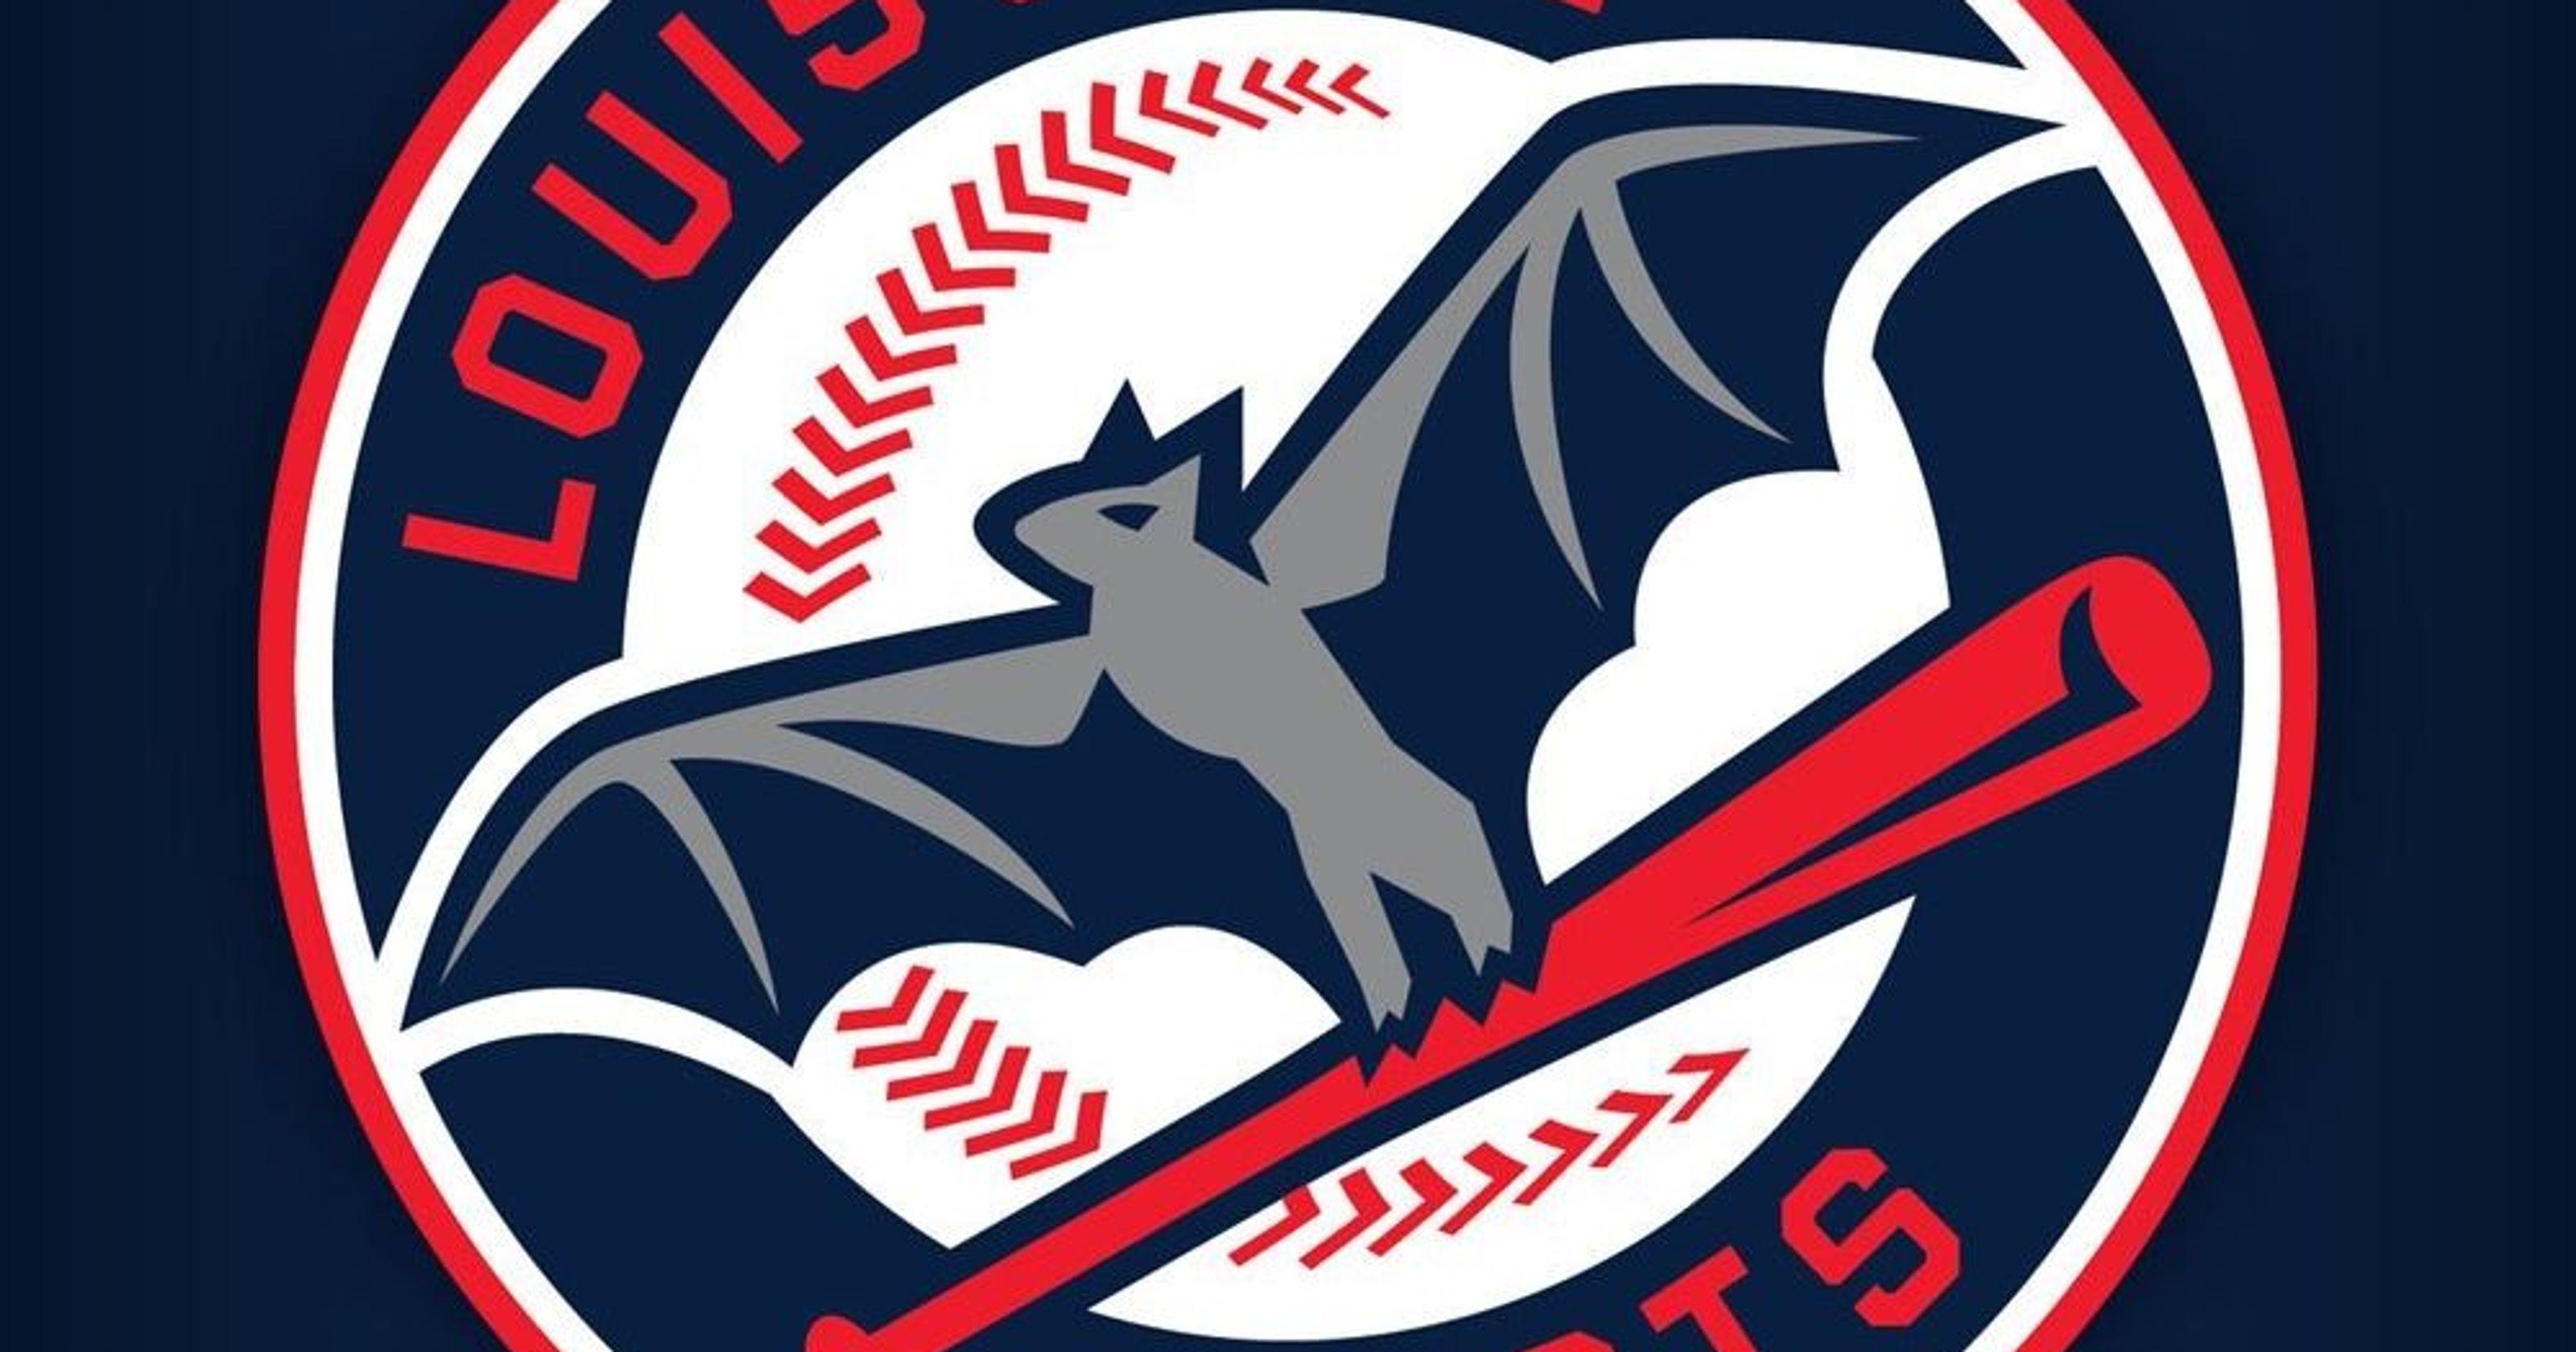 Louisville Bats New Logo - Louisville Bats return to roots with new logo, old color for Reds ...